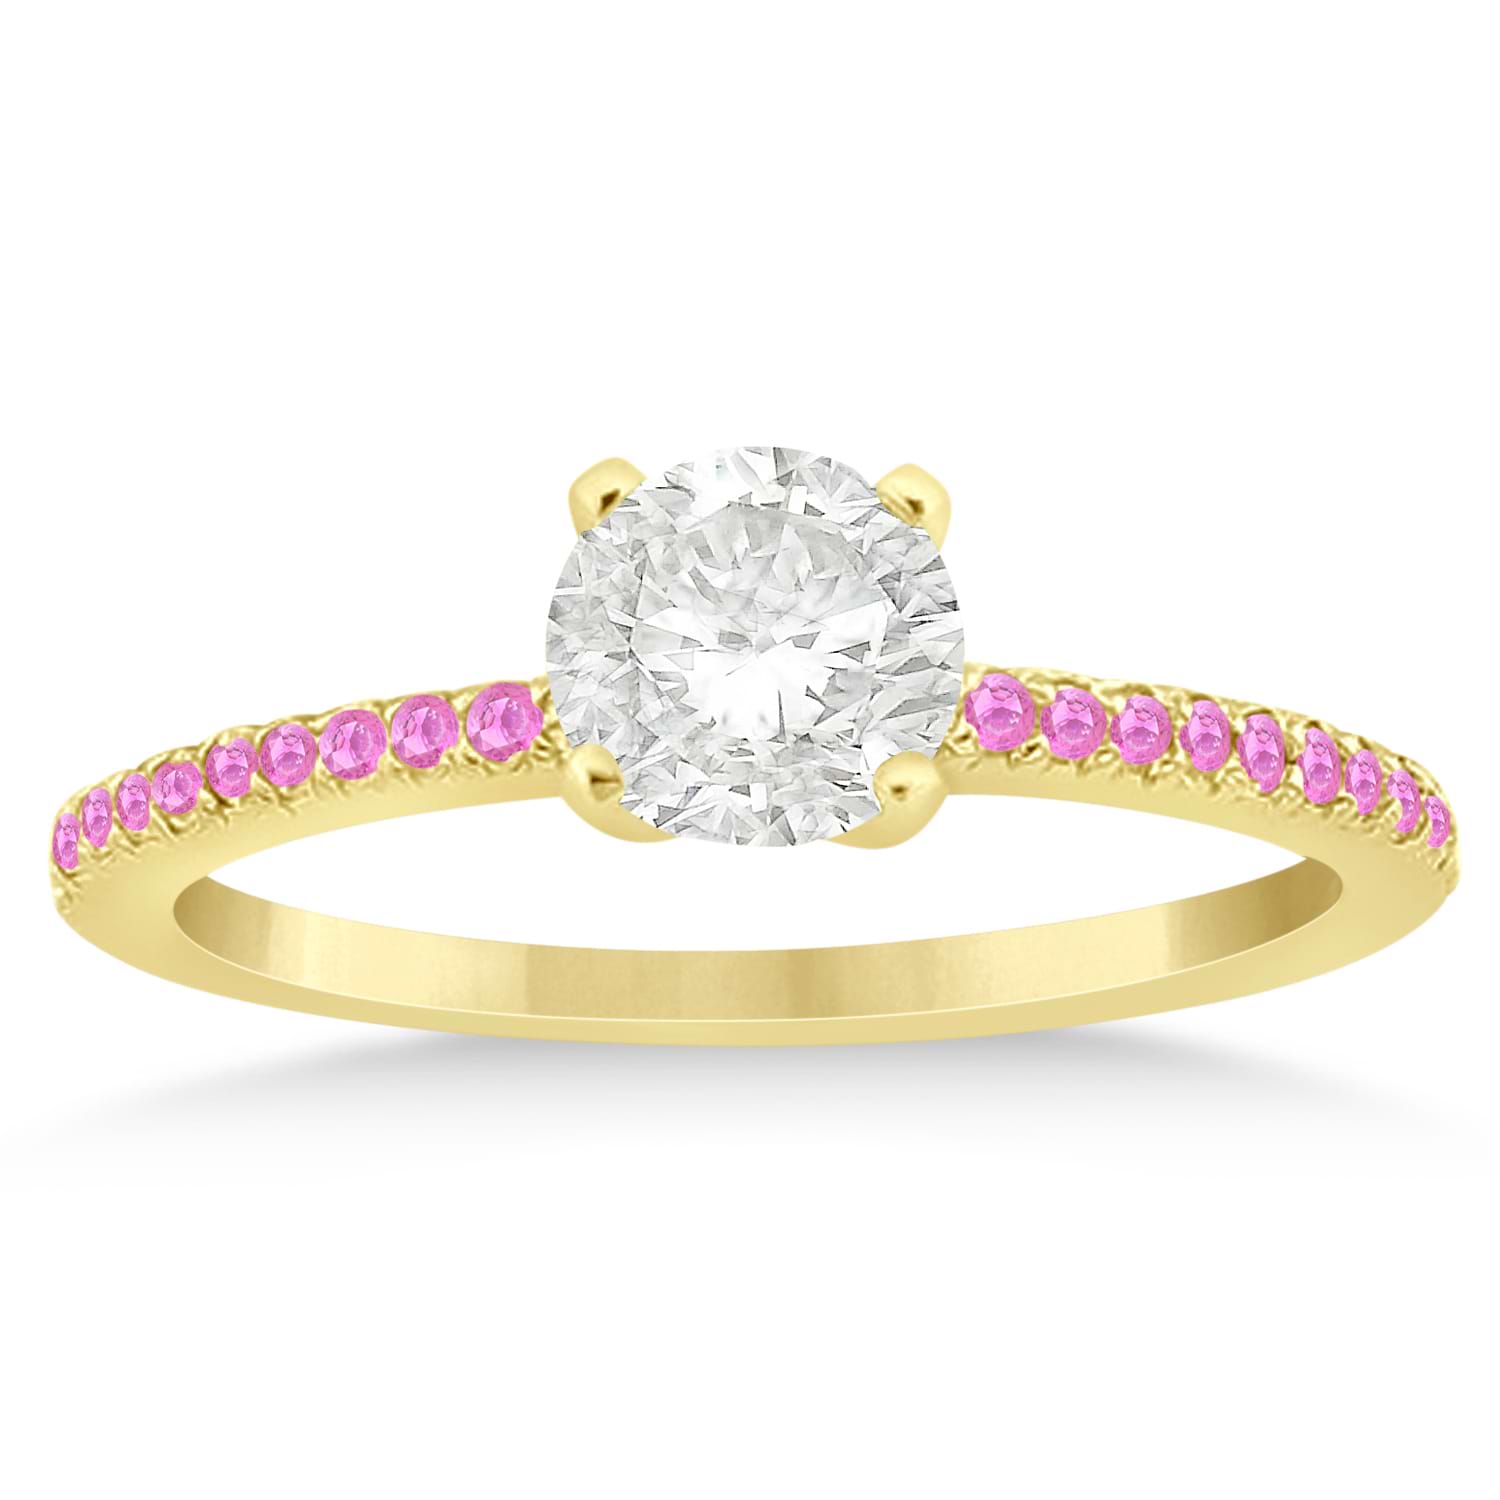 Pink Sapphire Accented Engagement Ring Setting 14k Yellow Gold 0.18ct